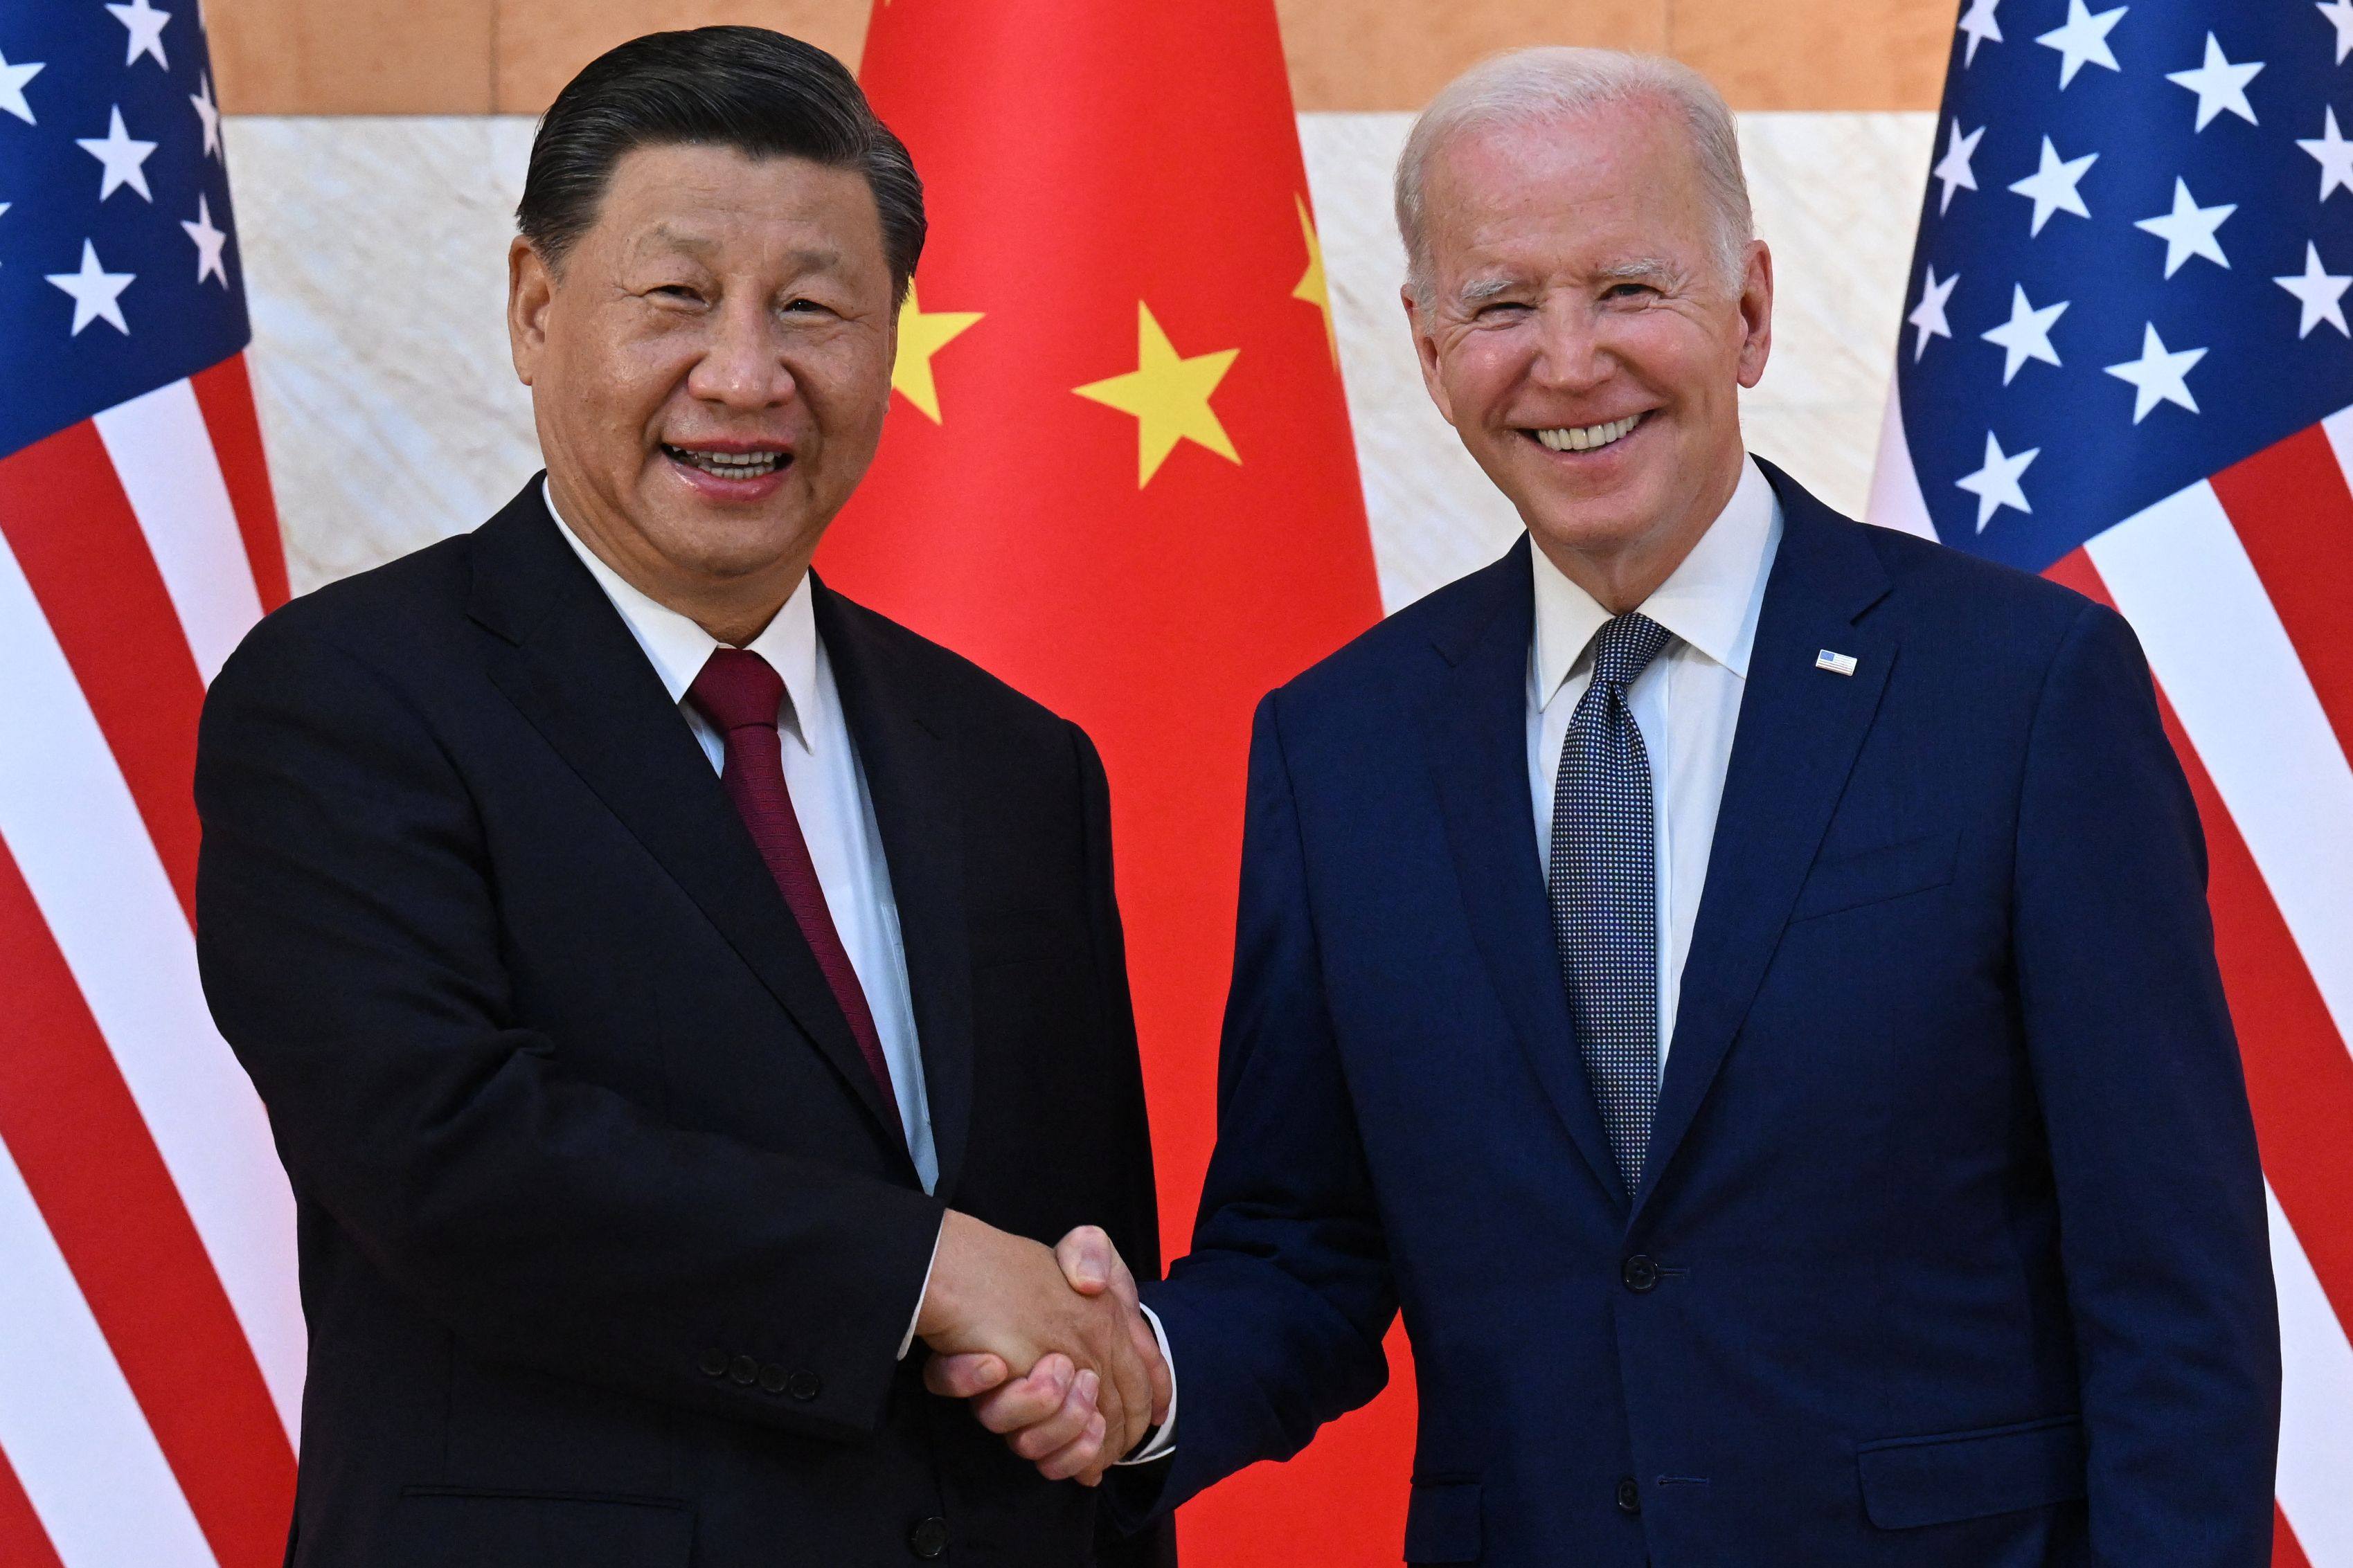 Chinese President Xi Jinping and US President Joe Biden shake hands as they meet on the sidelines of the G20 Summit in Bali on November 14 last year. By reaching for the low-hanging fruit, Biden and Xi could open the door to talks on more contentious topics. Photo: AFP